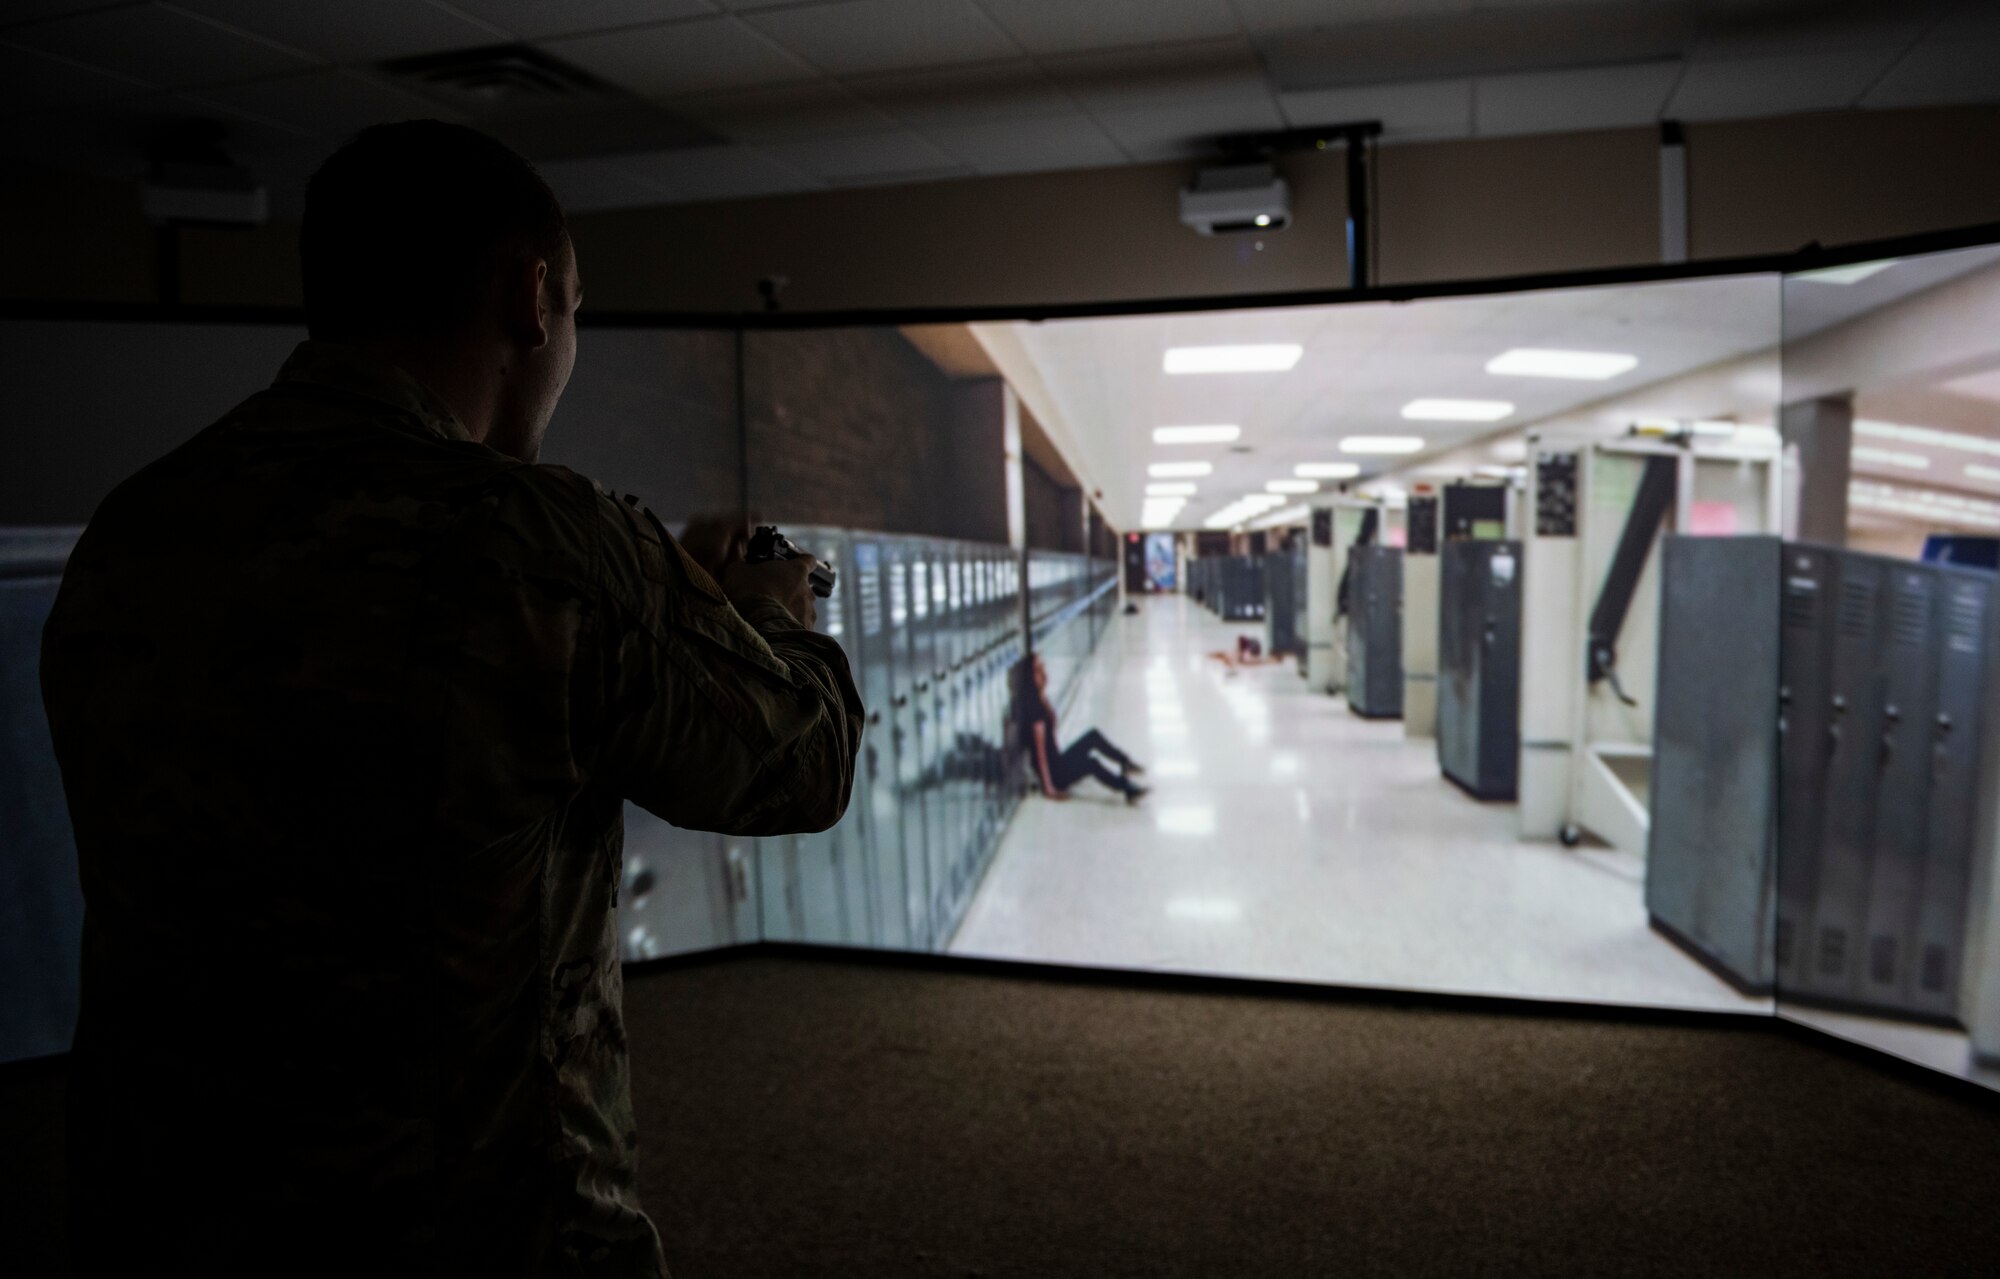 U.S. Air Force Staff Sgt. Thomas Badders, 325th Security Forces Squadron noncommissioned officer in charge of confinement, makes his way through a virtual active shooter training scenario at Tyndall Air Force Base, Florida, Feb. 5, 2020. Security Forces uses the Multiple Interactive Learning/Training Objectives Range to put it’s members in a life-like scenario. (U.S. Air Force photo by Senior Airman Stefan Alvarez)